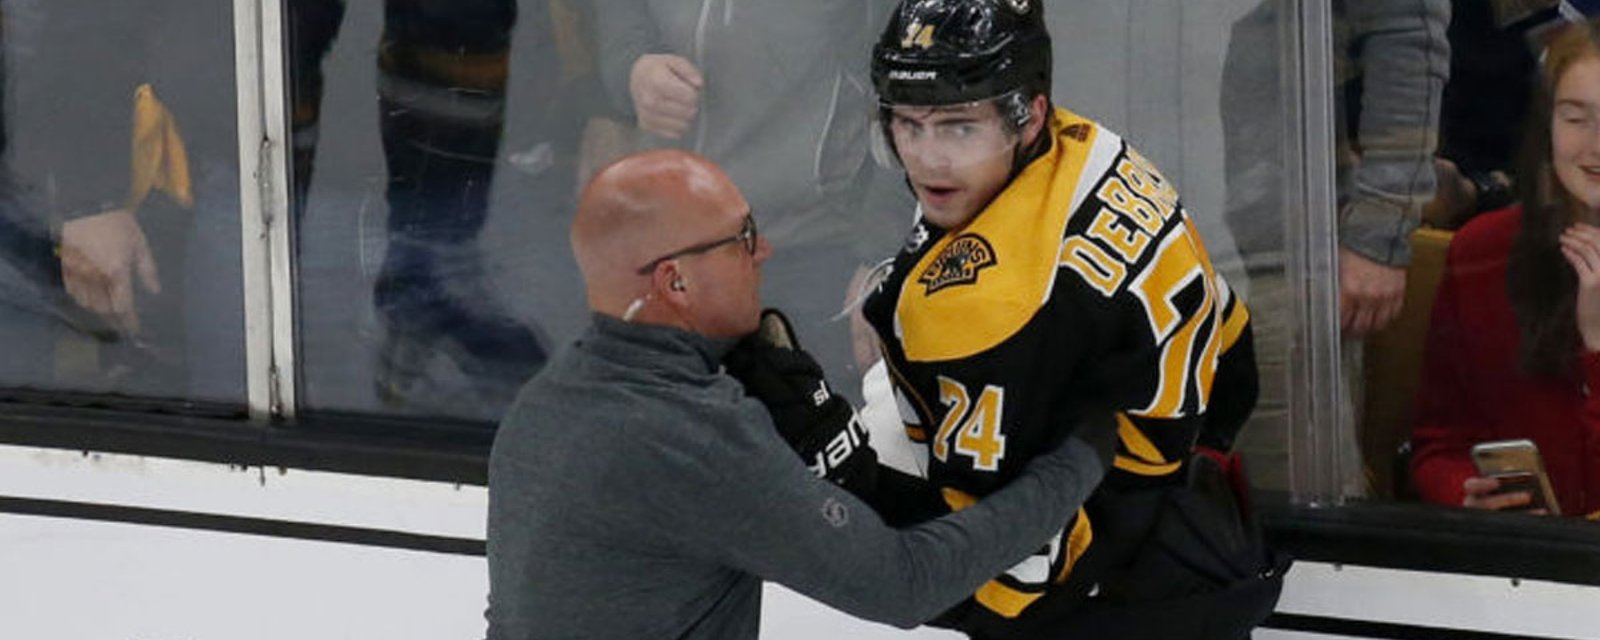 DeBrusk forced to delete social media after being harassed 